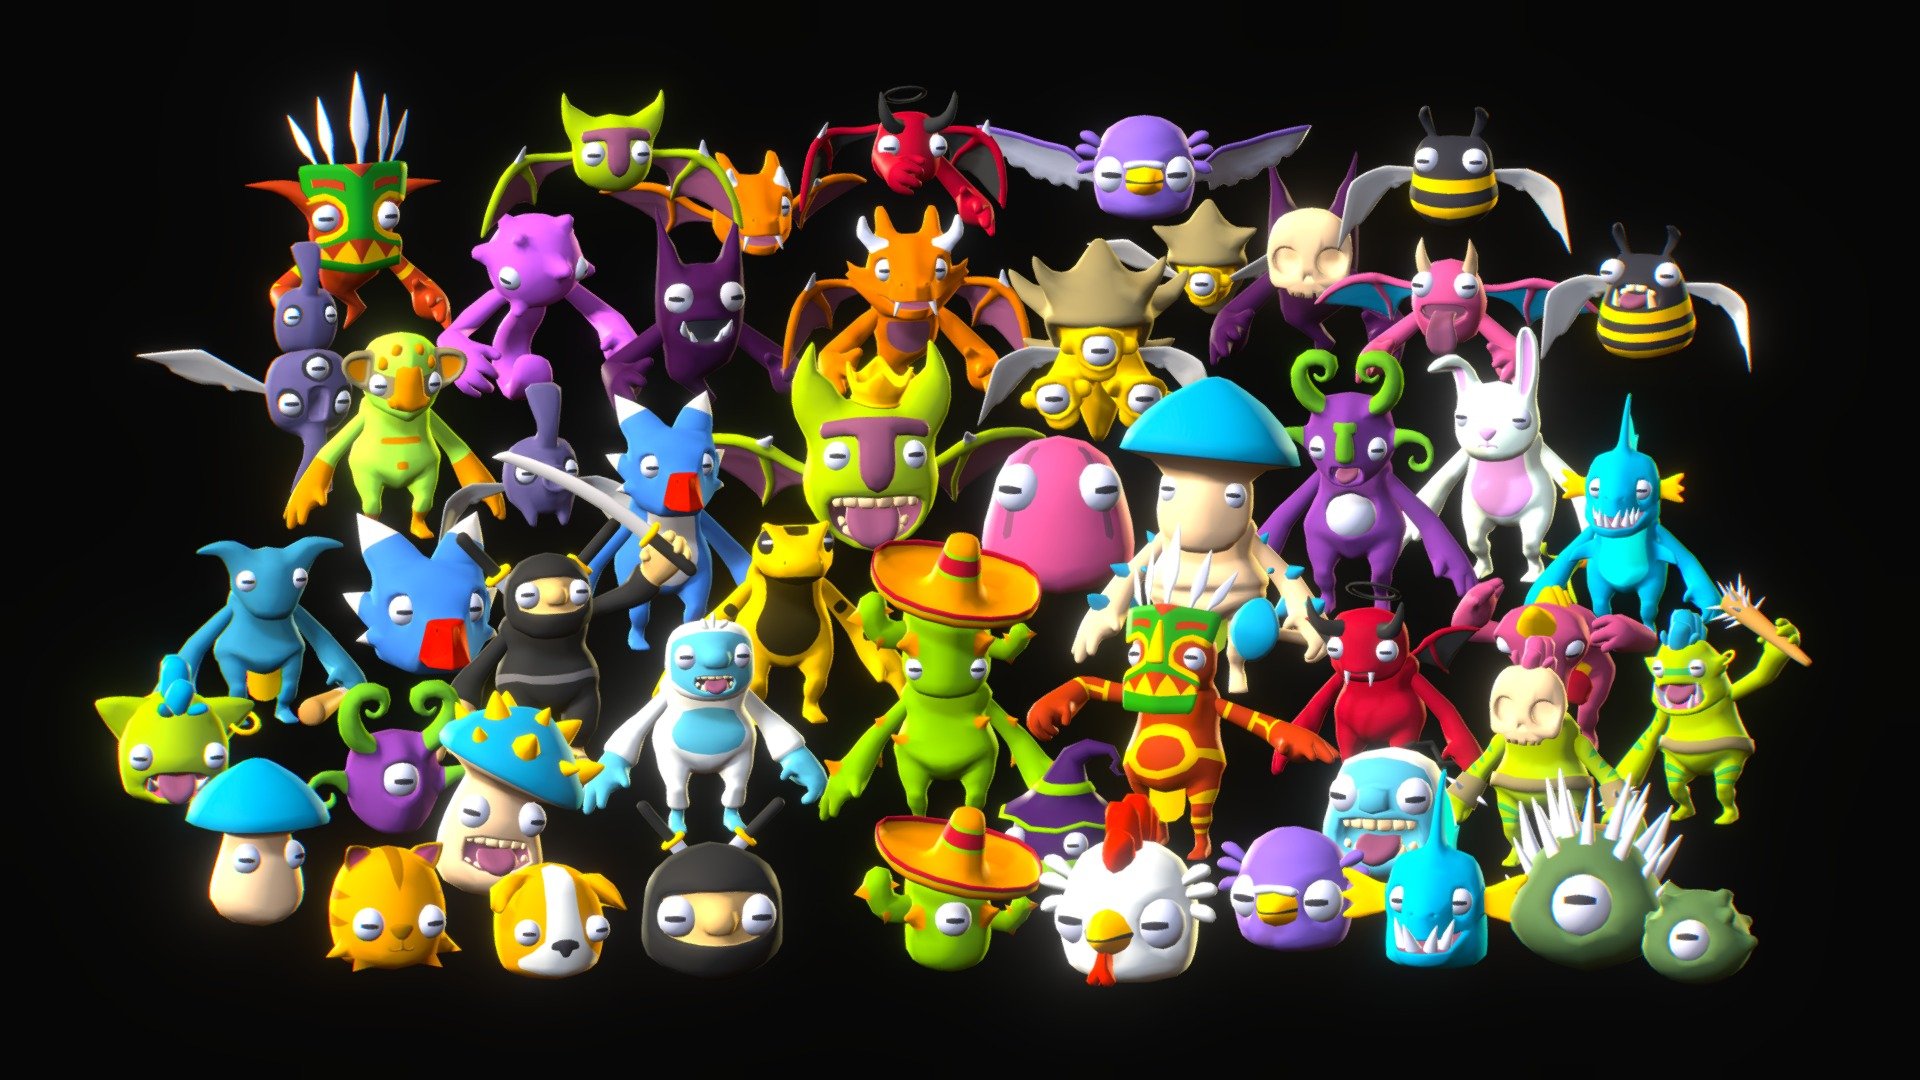 50 Monsters with attack, death, running, walking, and many more animations.
In .Blend, .FBX, .OBJ and glTF formats!


Free to use in any project, even commercially! (CC0)

Download for free on my website:
https://quaternius.com - Ultimate Monsters Pack - Download Free 3D model by quaternius 3d model